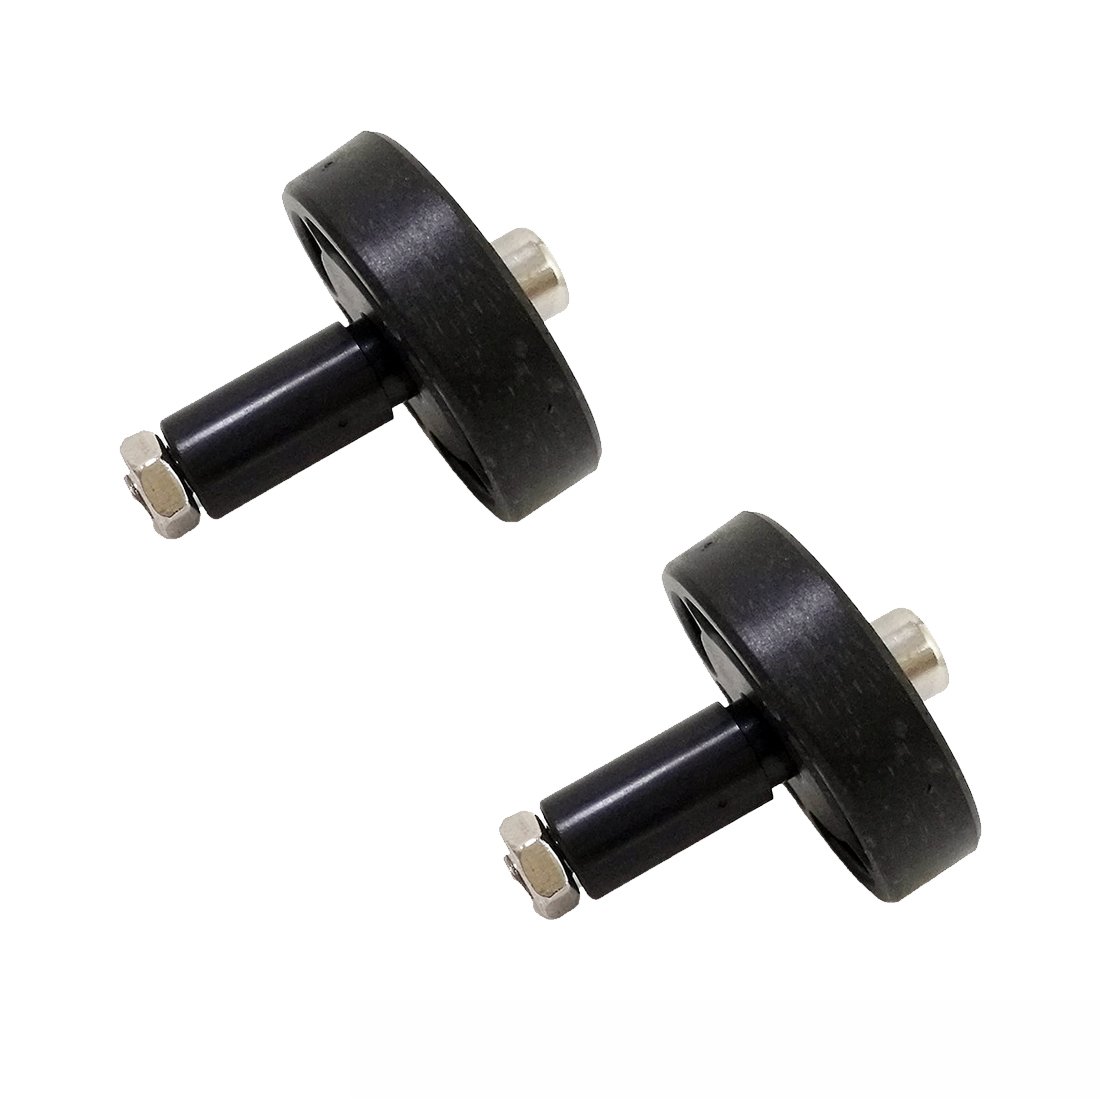 2Pcs Black Rubber Bearing Wheels for Chassis Tank Car 2